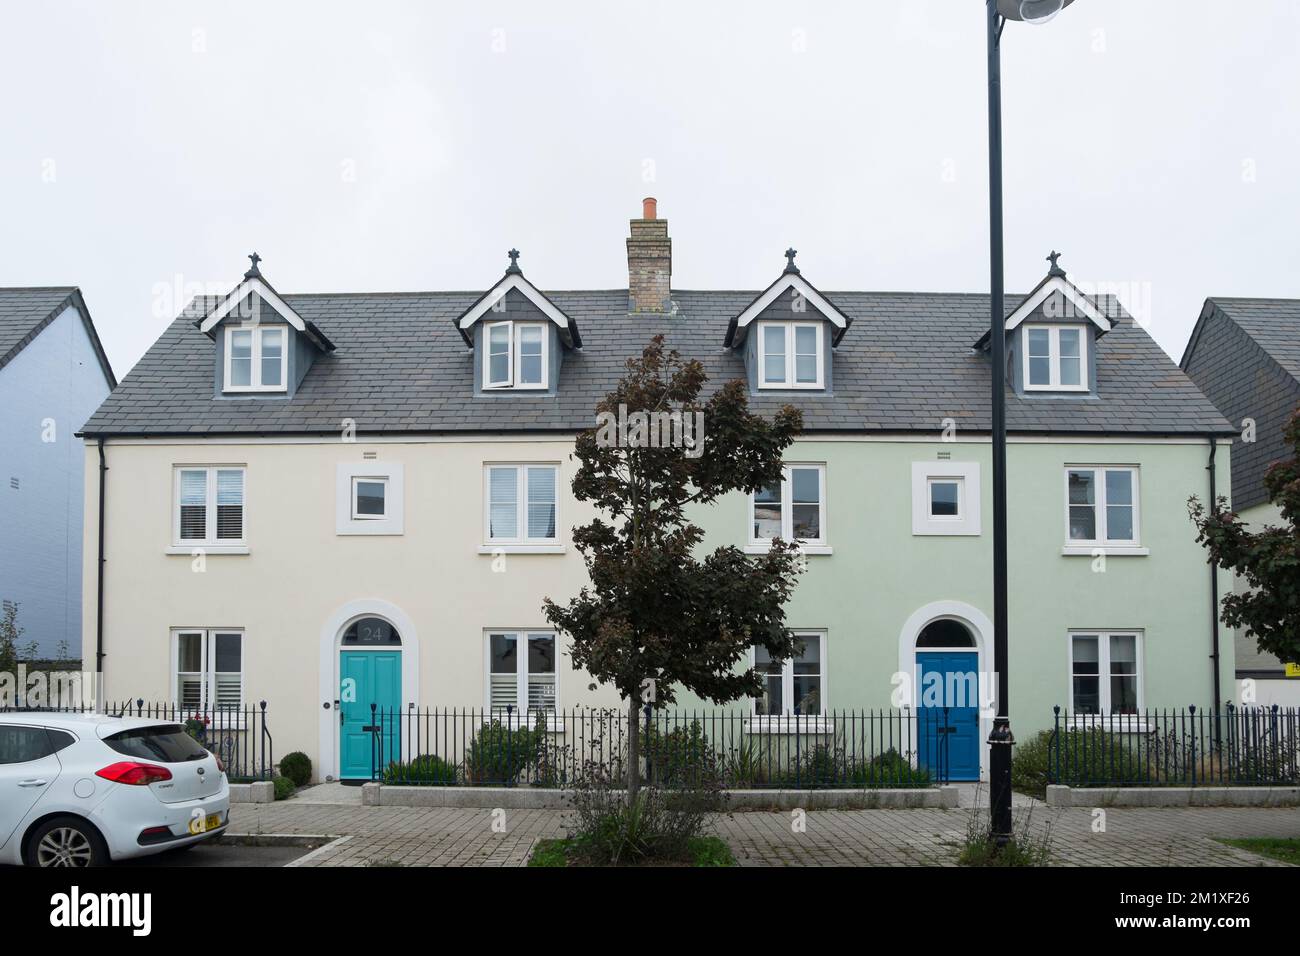 Two semi-detached, three storey houses on Stret Euther Penndragon,Nansledan, a development by the Duchy of Cornwall in Newquay, South West England, UK Stock Photo